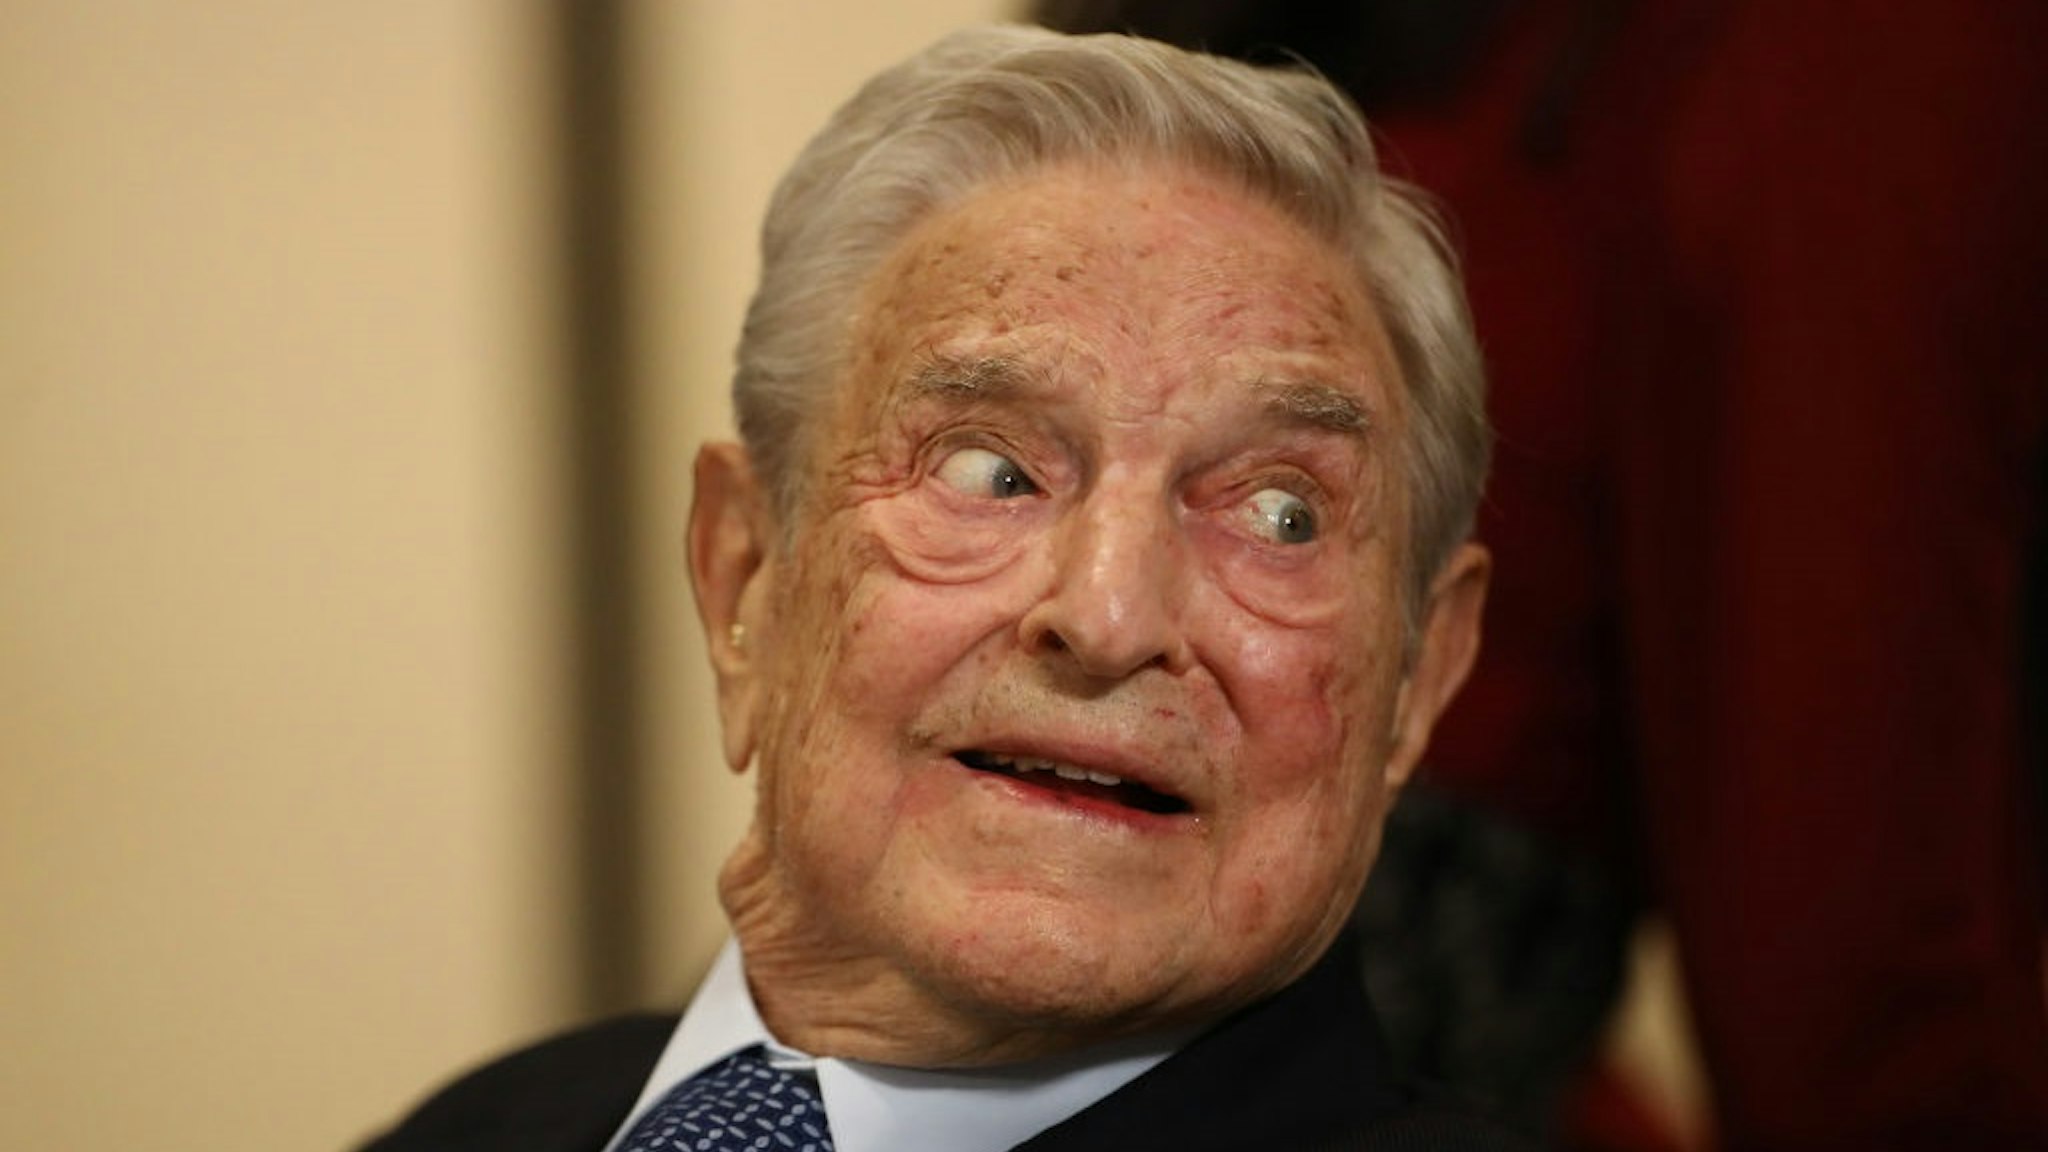 George Soros, billionaire and founder of Soros Fund Management LLC, on day three of the World Economic Forum (WEF) in Davos, Switzerland, on Thursday, Jan. 23, 2020.